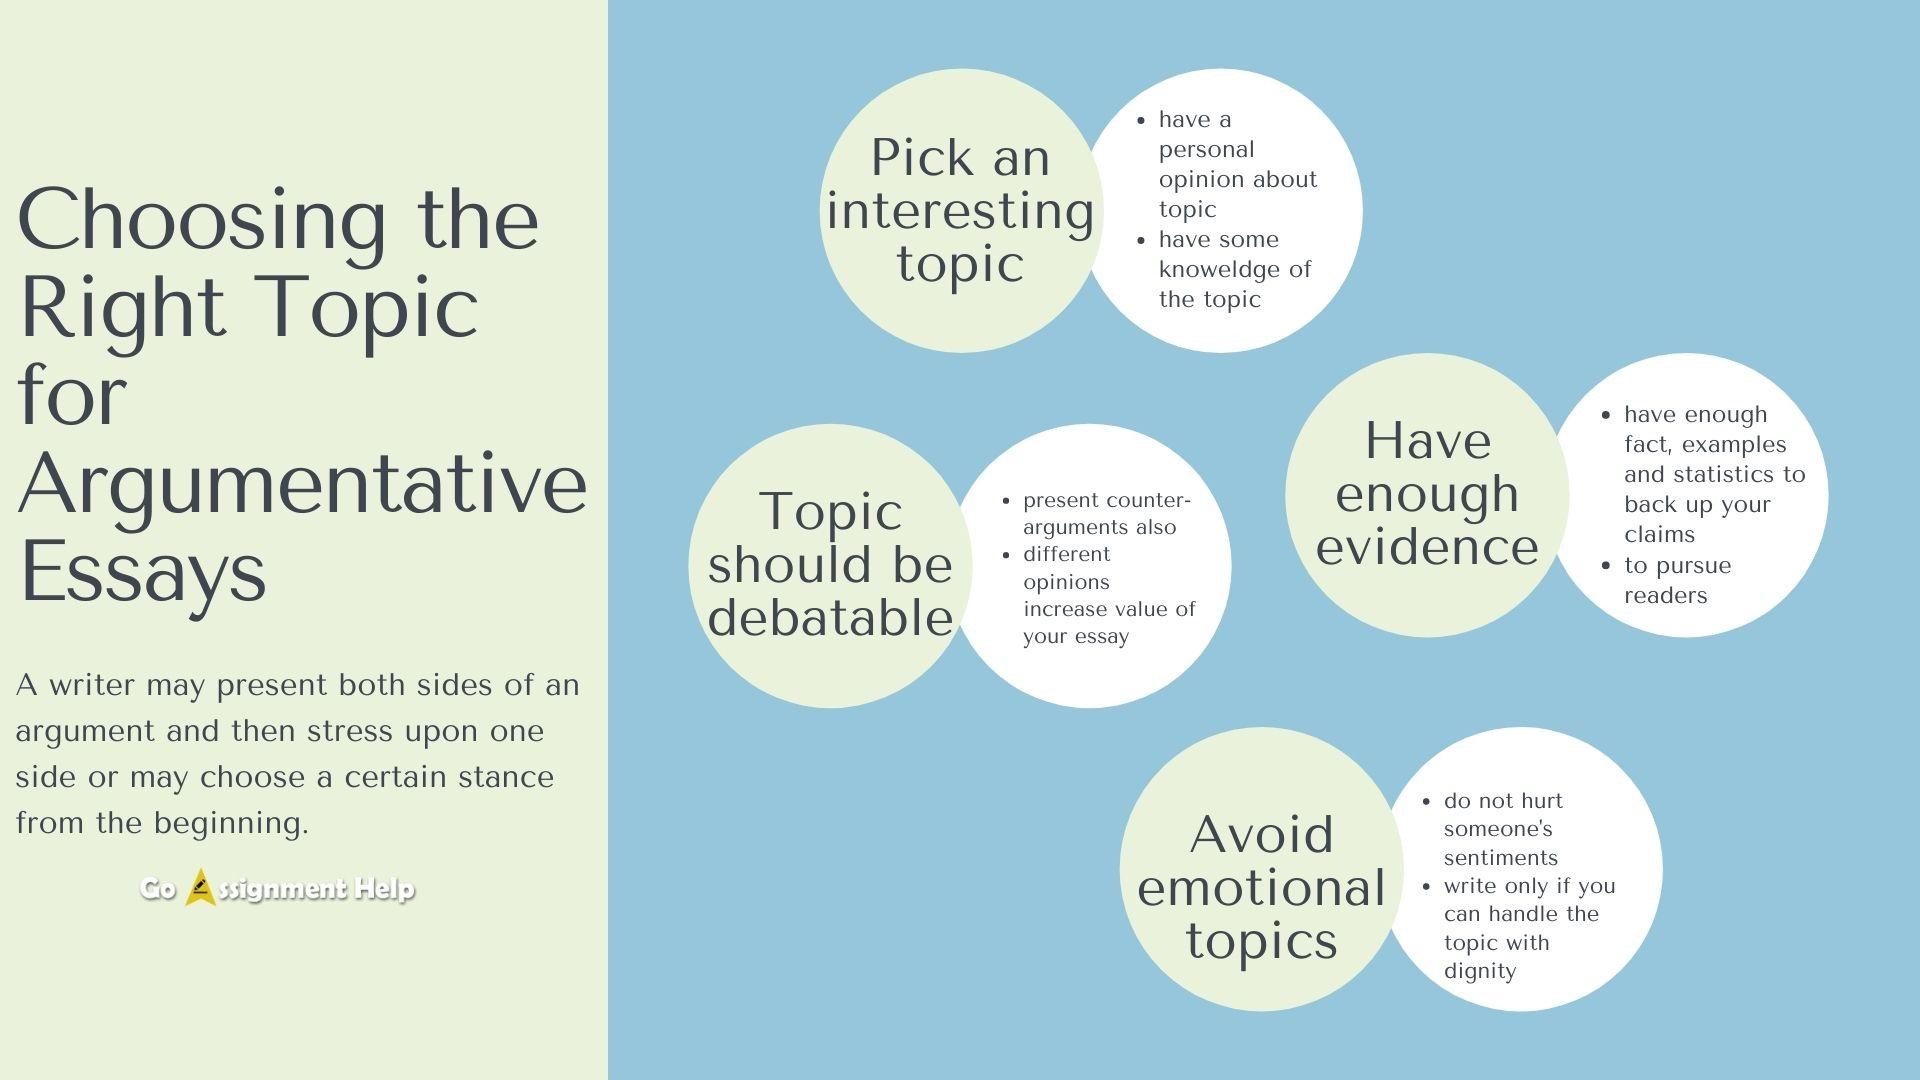 How to Choose the Right topic for Argumentative Essays